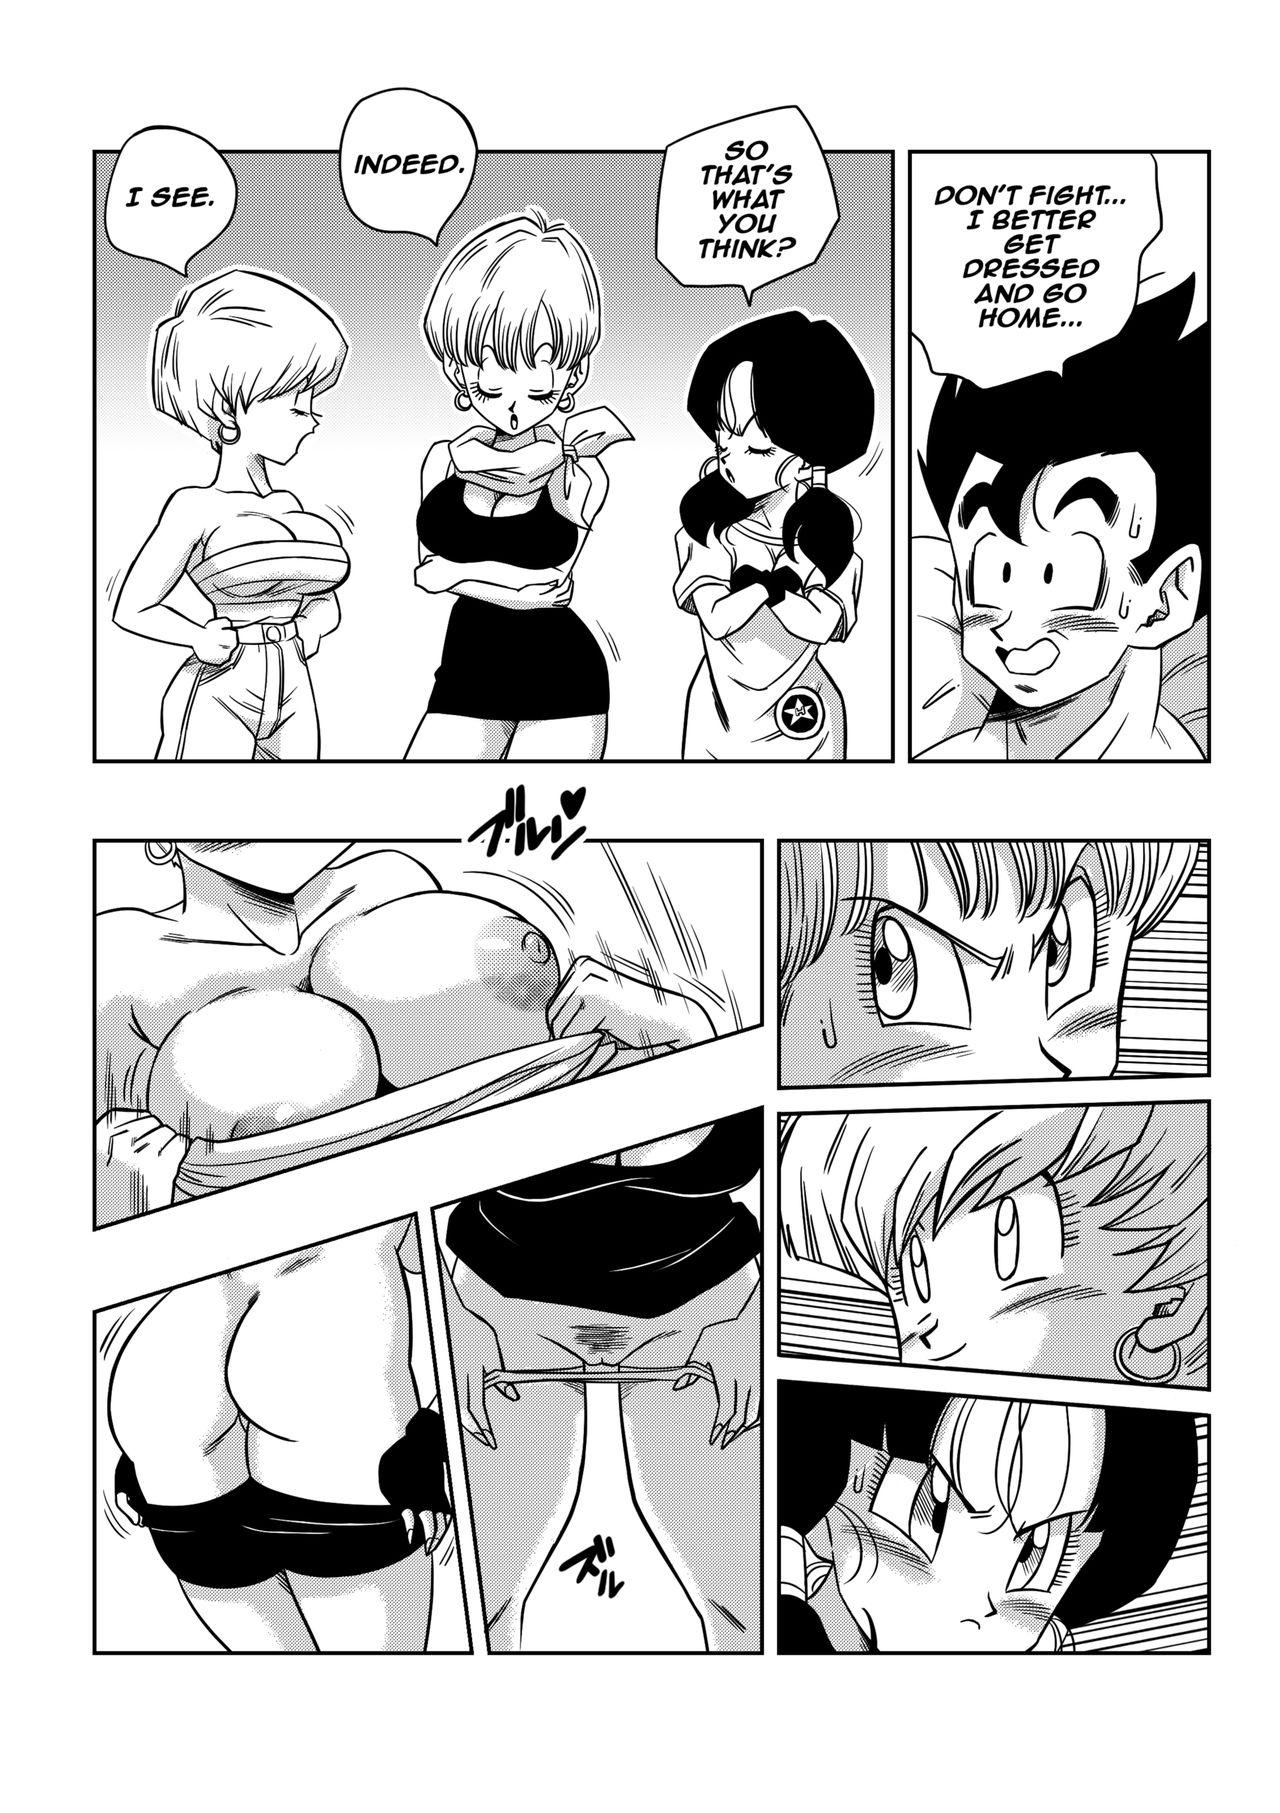 Nudes LOVE TRIANGLE Z - Part 4 - Dragon ball z Sexy Girl Sex - Page 10